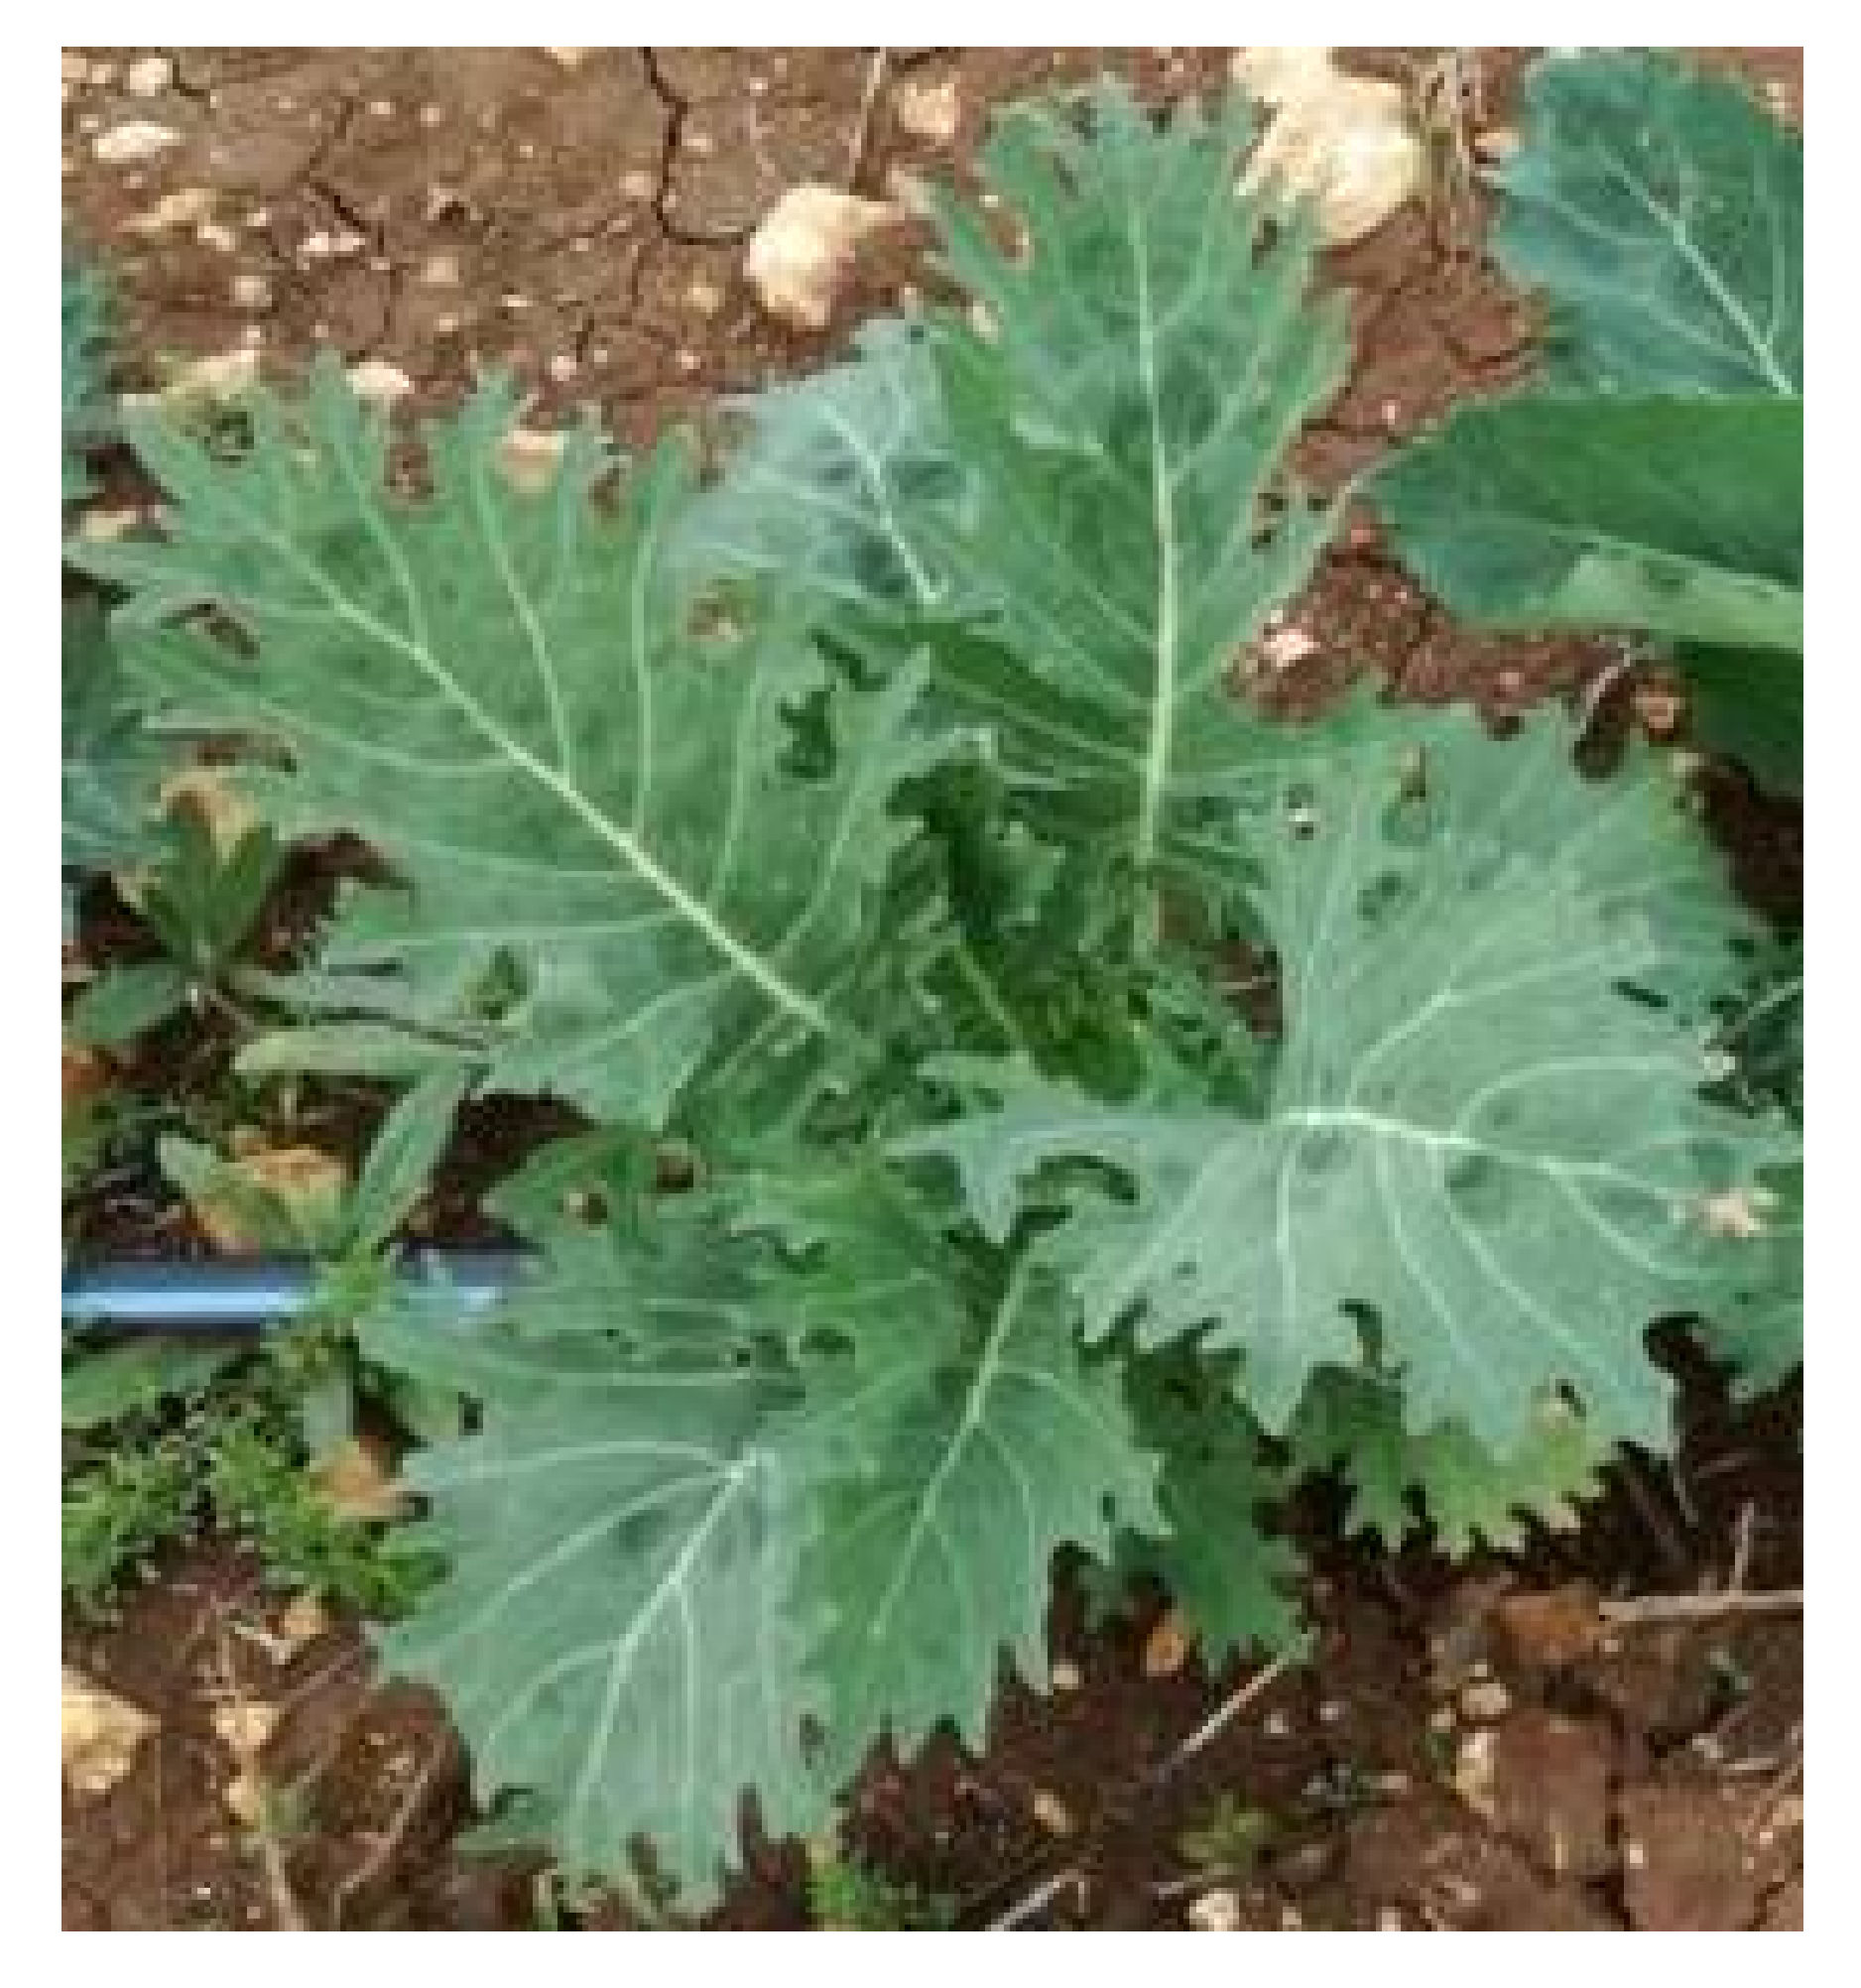 Diversity | Free Full-Text | Genetic, Bio-Agronomic, and Nutritional  Characterization of Kale (Brassica Oleracea L. var. Acephala) Diversity in  Apulia, Southern Italy